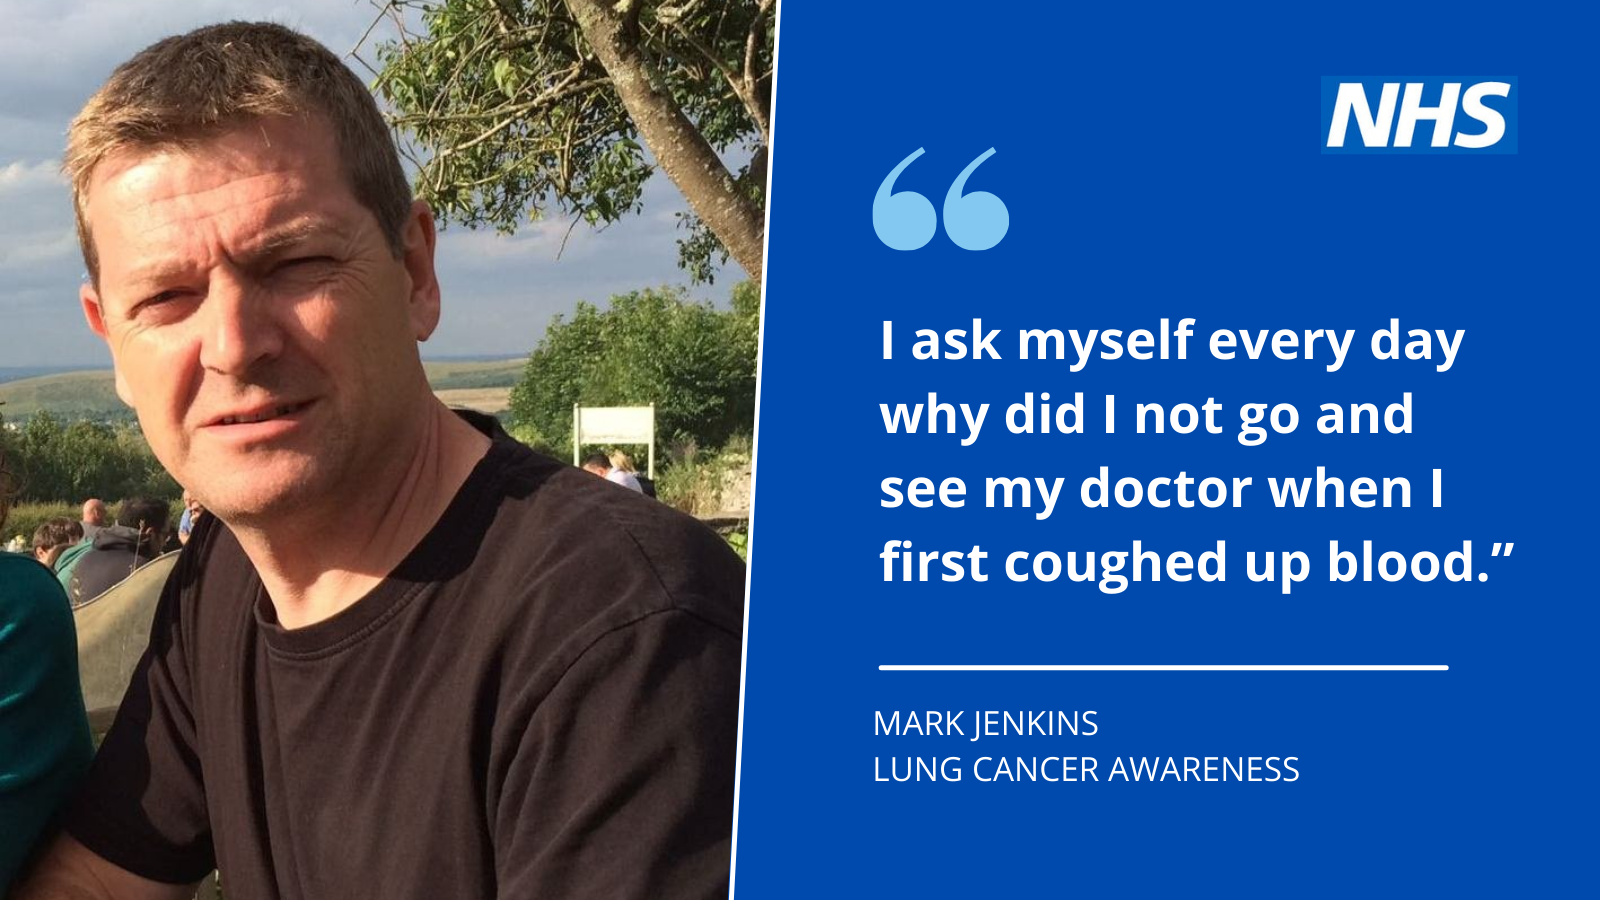 Photo of Mark Jenkins who was diagnosed with lung cancer alongside a quote which says: 